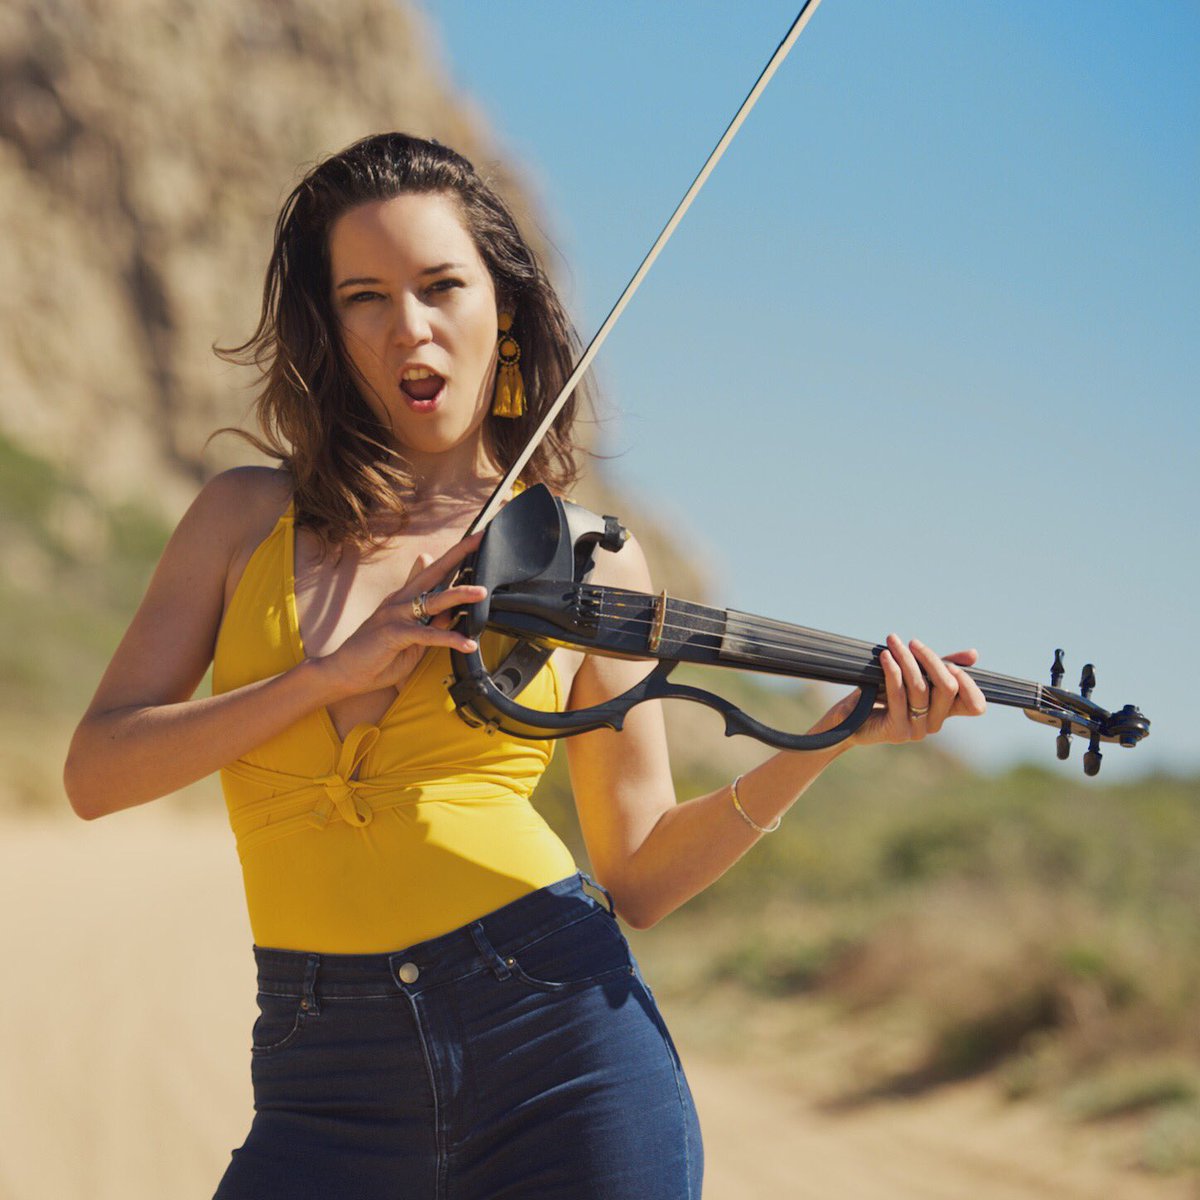 Kyst hjælpemotor Resultat Caitlin De Ville on Twitter: "Say what?! 😱 Another video shoot done and  dusted - road trippin' sun soakin' wine drinkin' happy weekend vibes to you  all☀️ #electricviolin #electricviolinist #youtuber #youtube #summer #